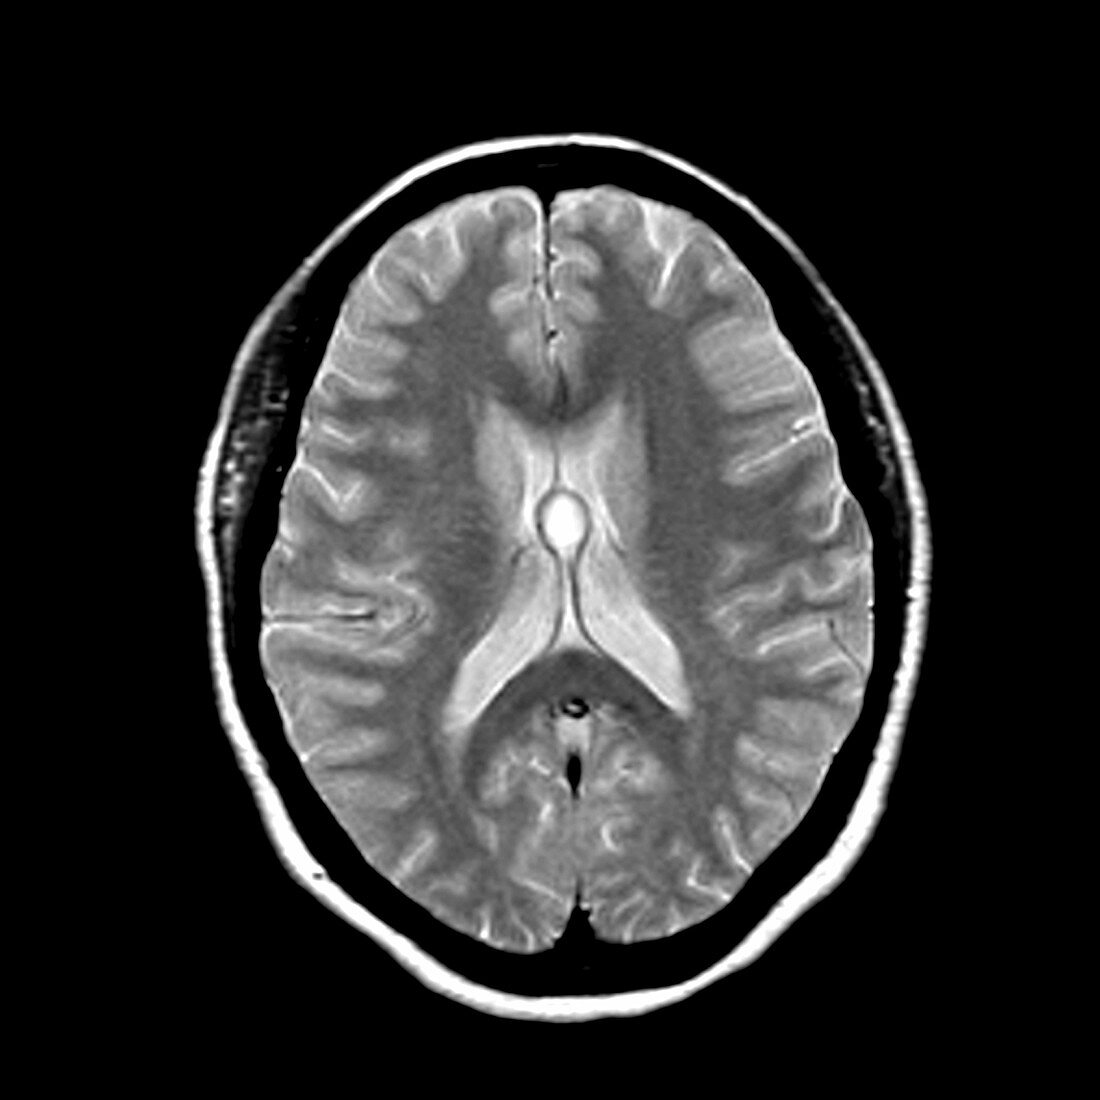 Colloid Cyst in the Human Brain